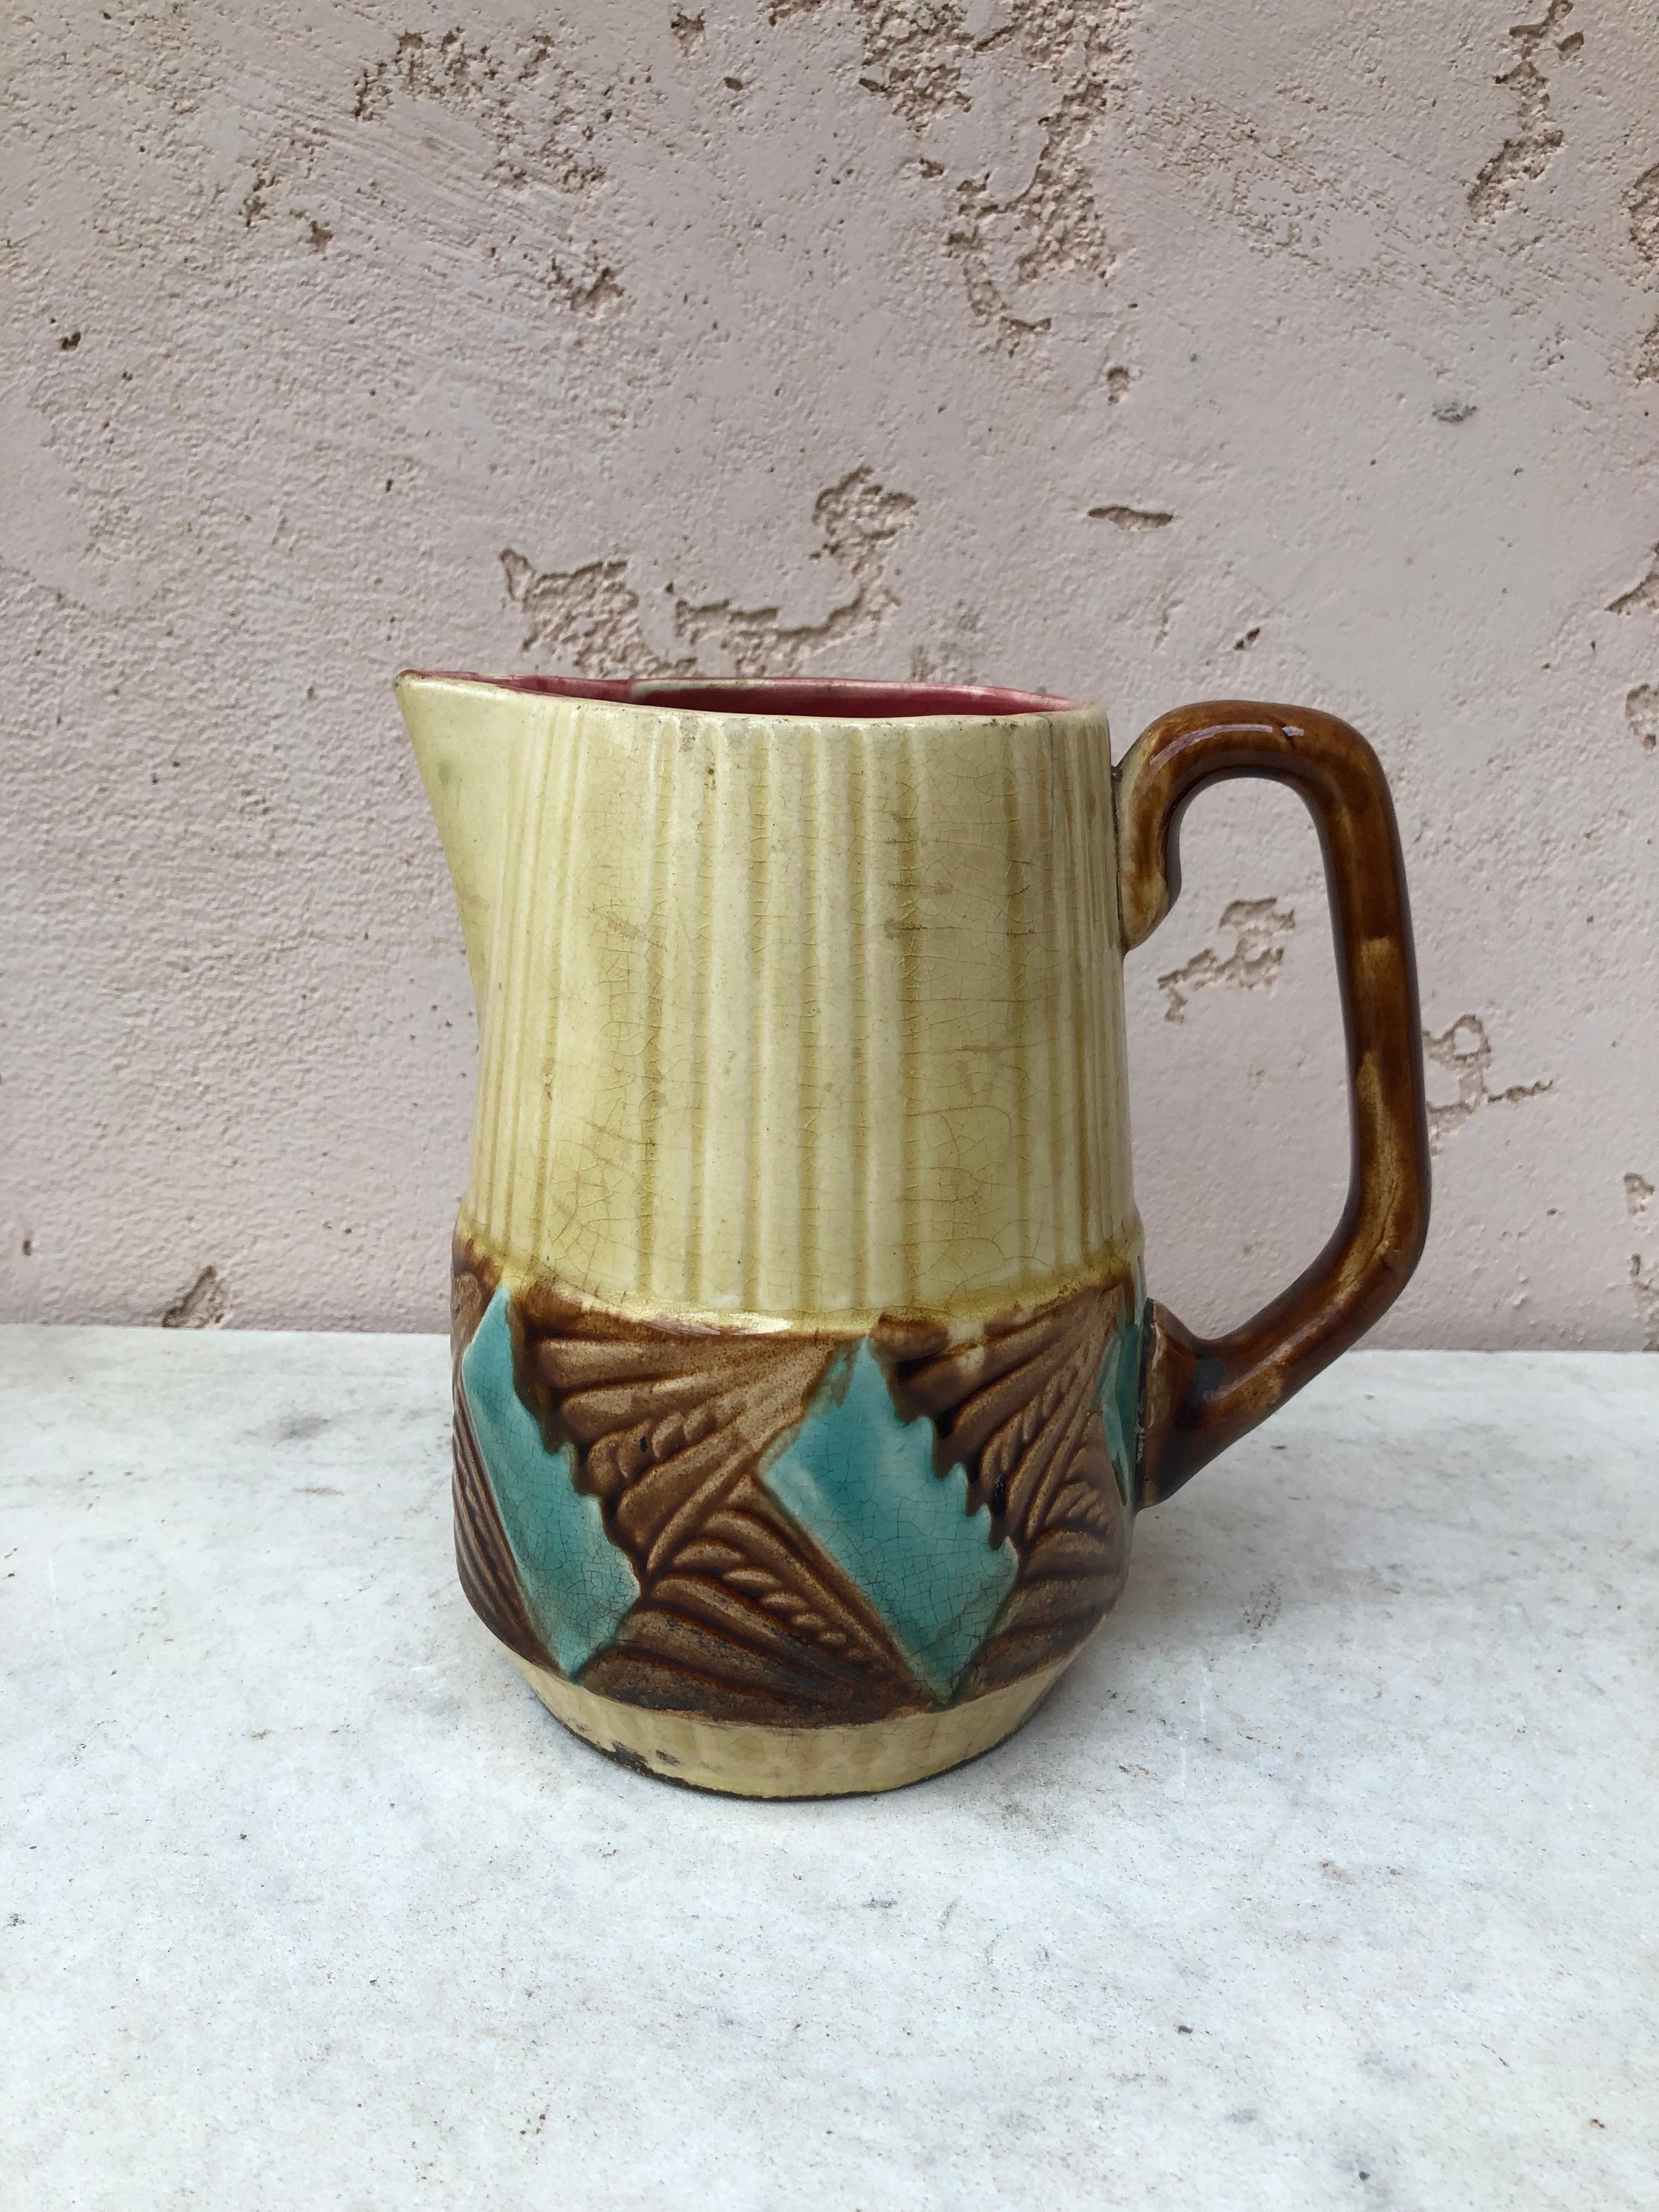 Large French Majolica pitcher signed Orchies, Circa 1930.
Art deco period.